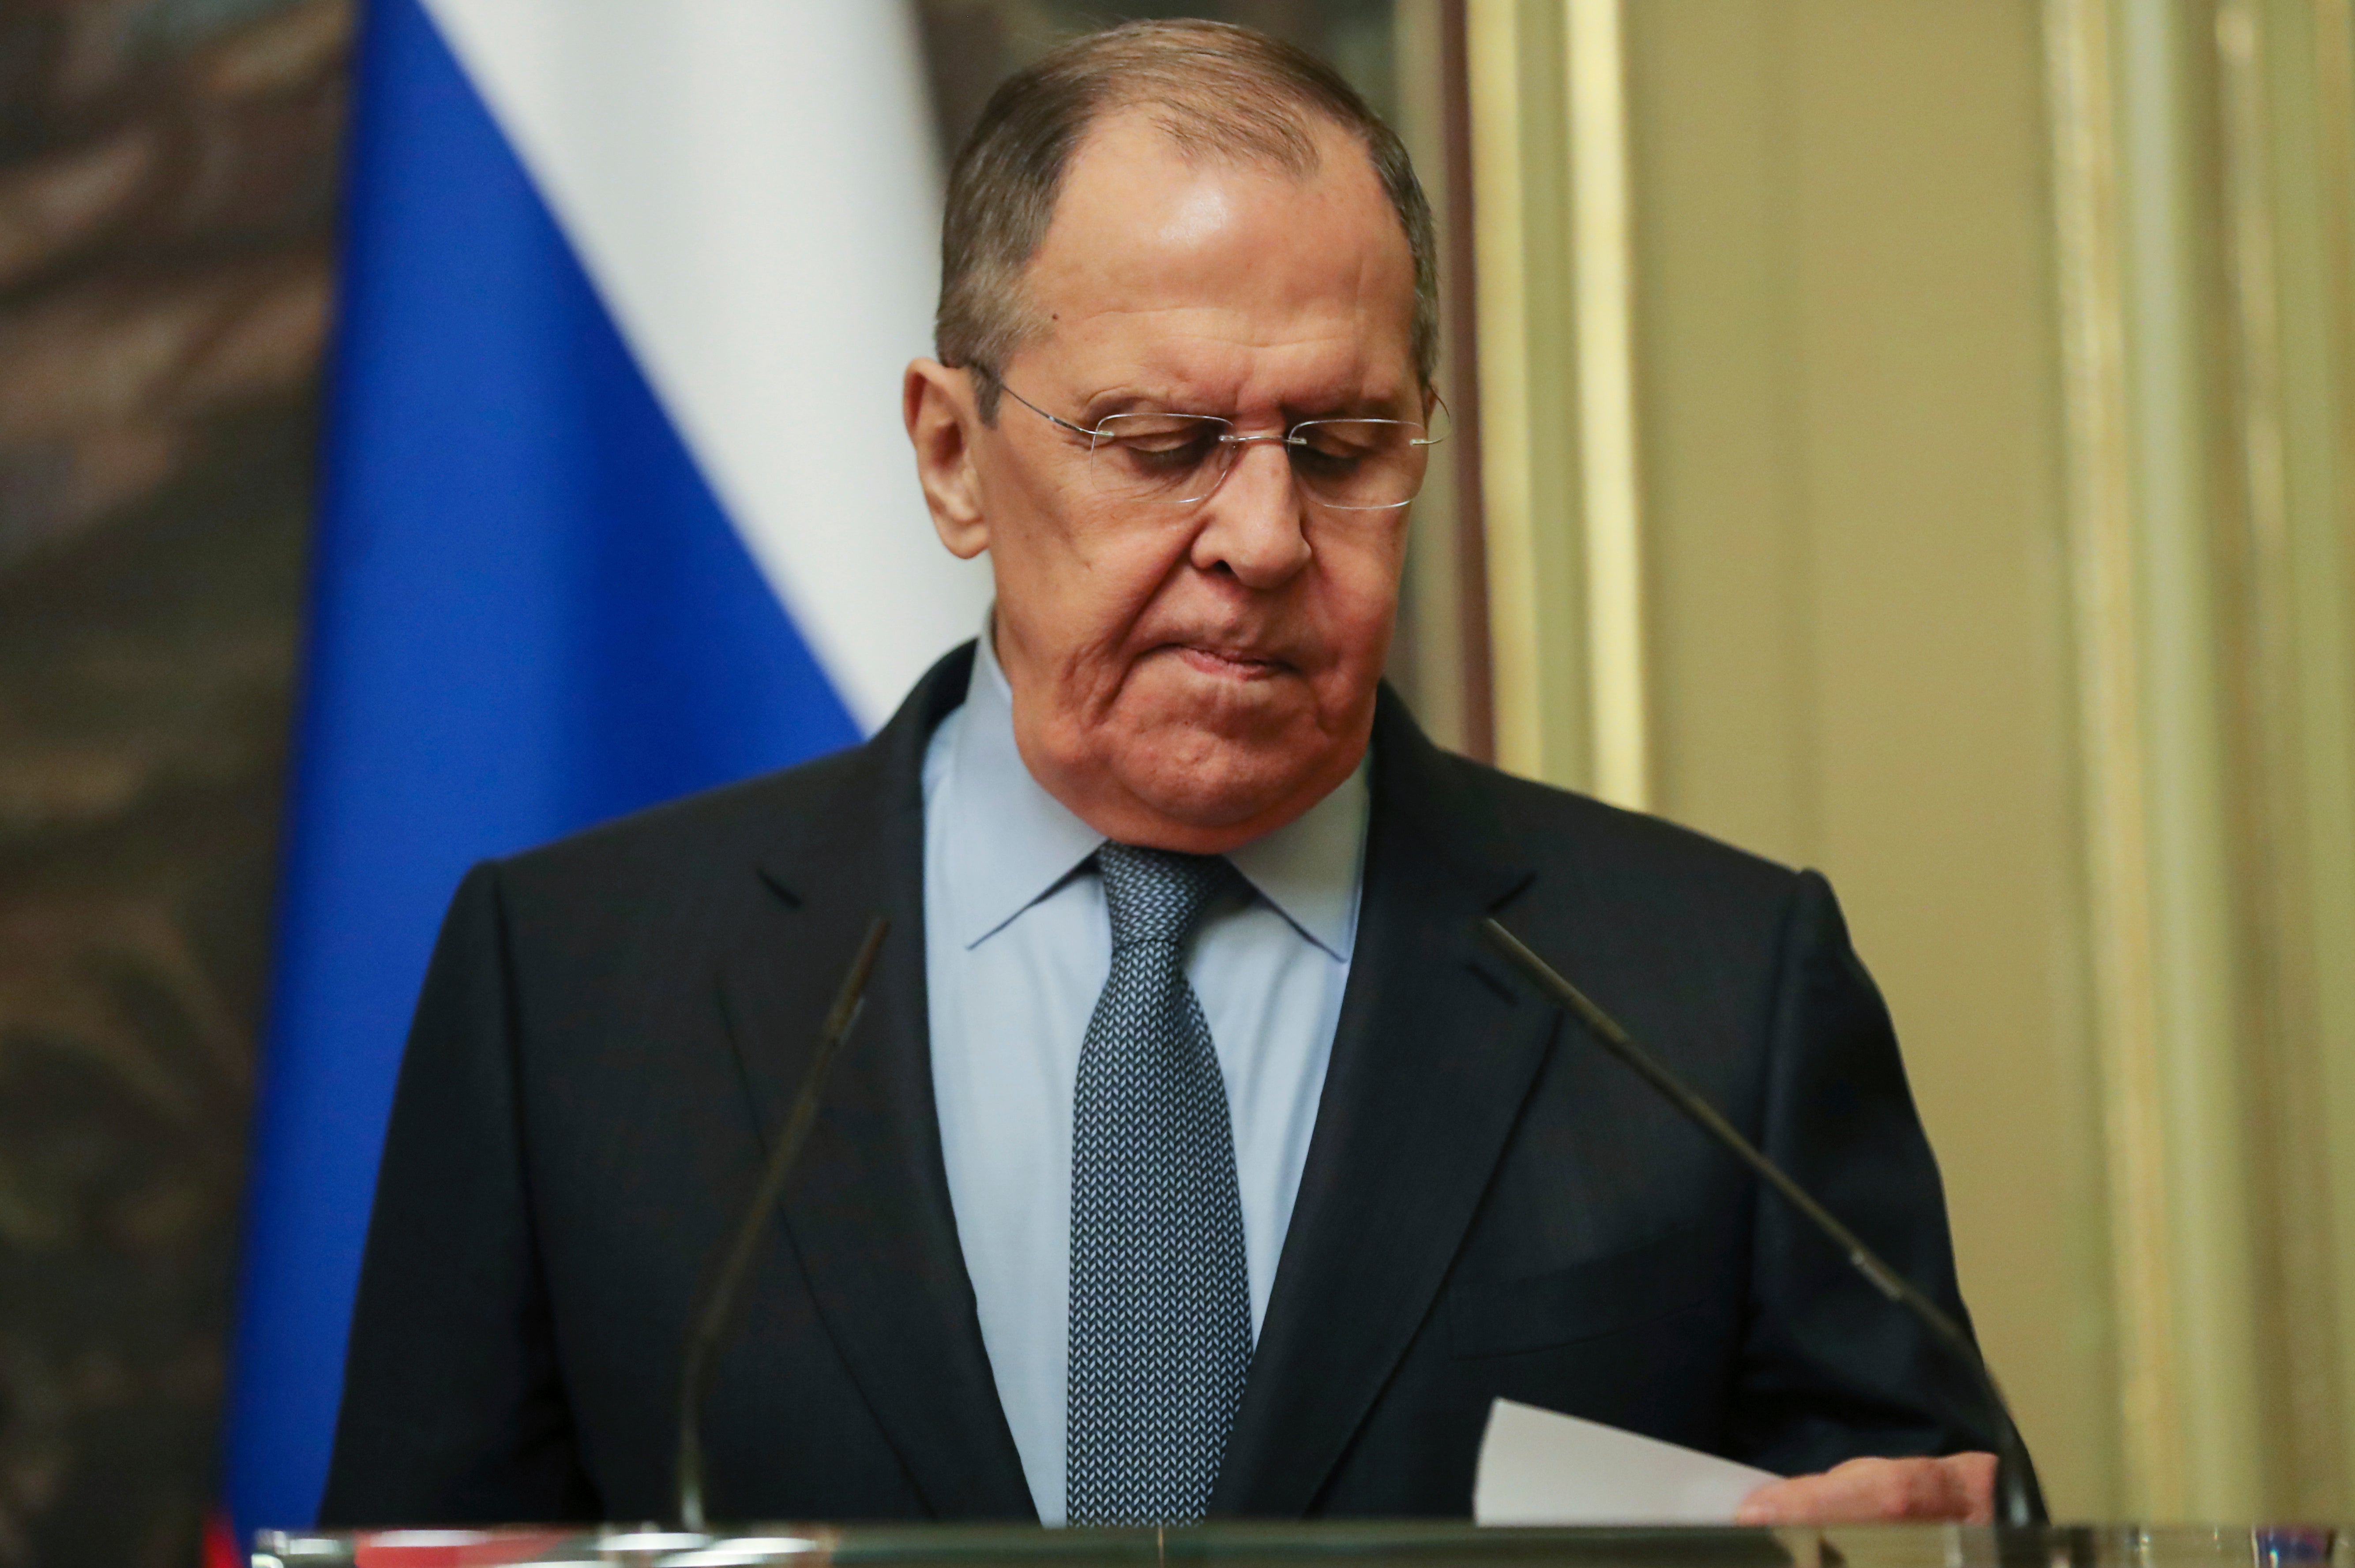 Sergei Lavrov has cautioned the west about supplying weapons to Ukraine